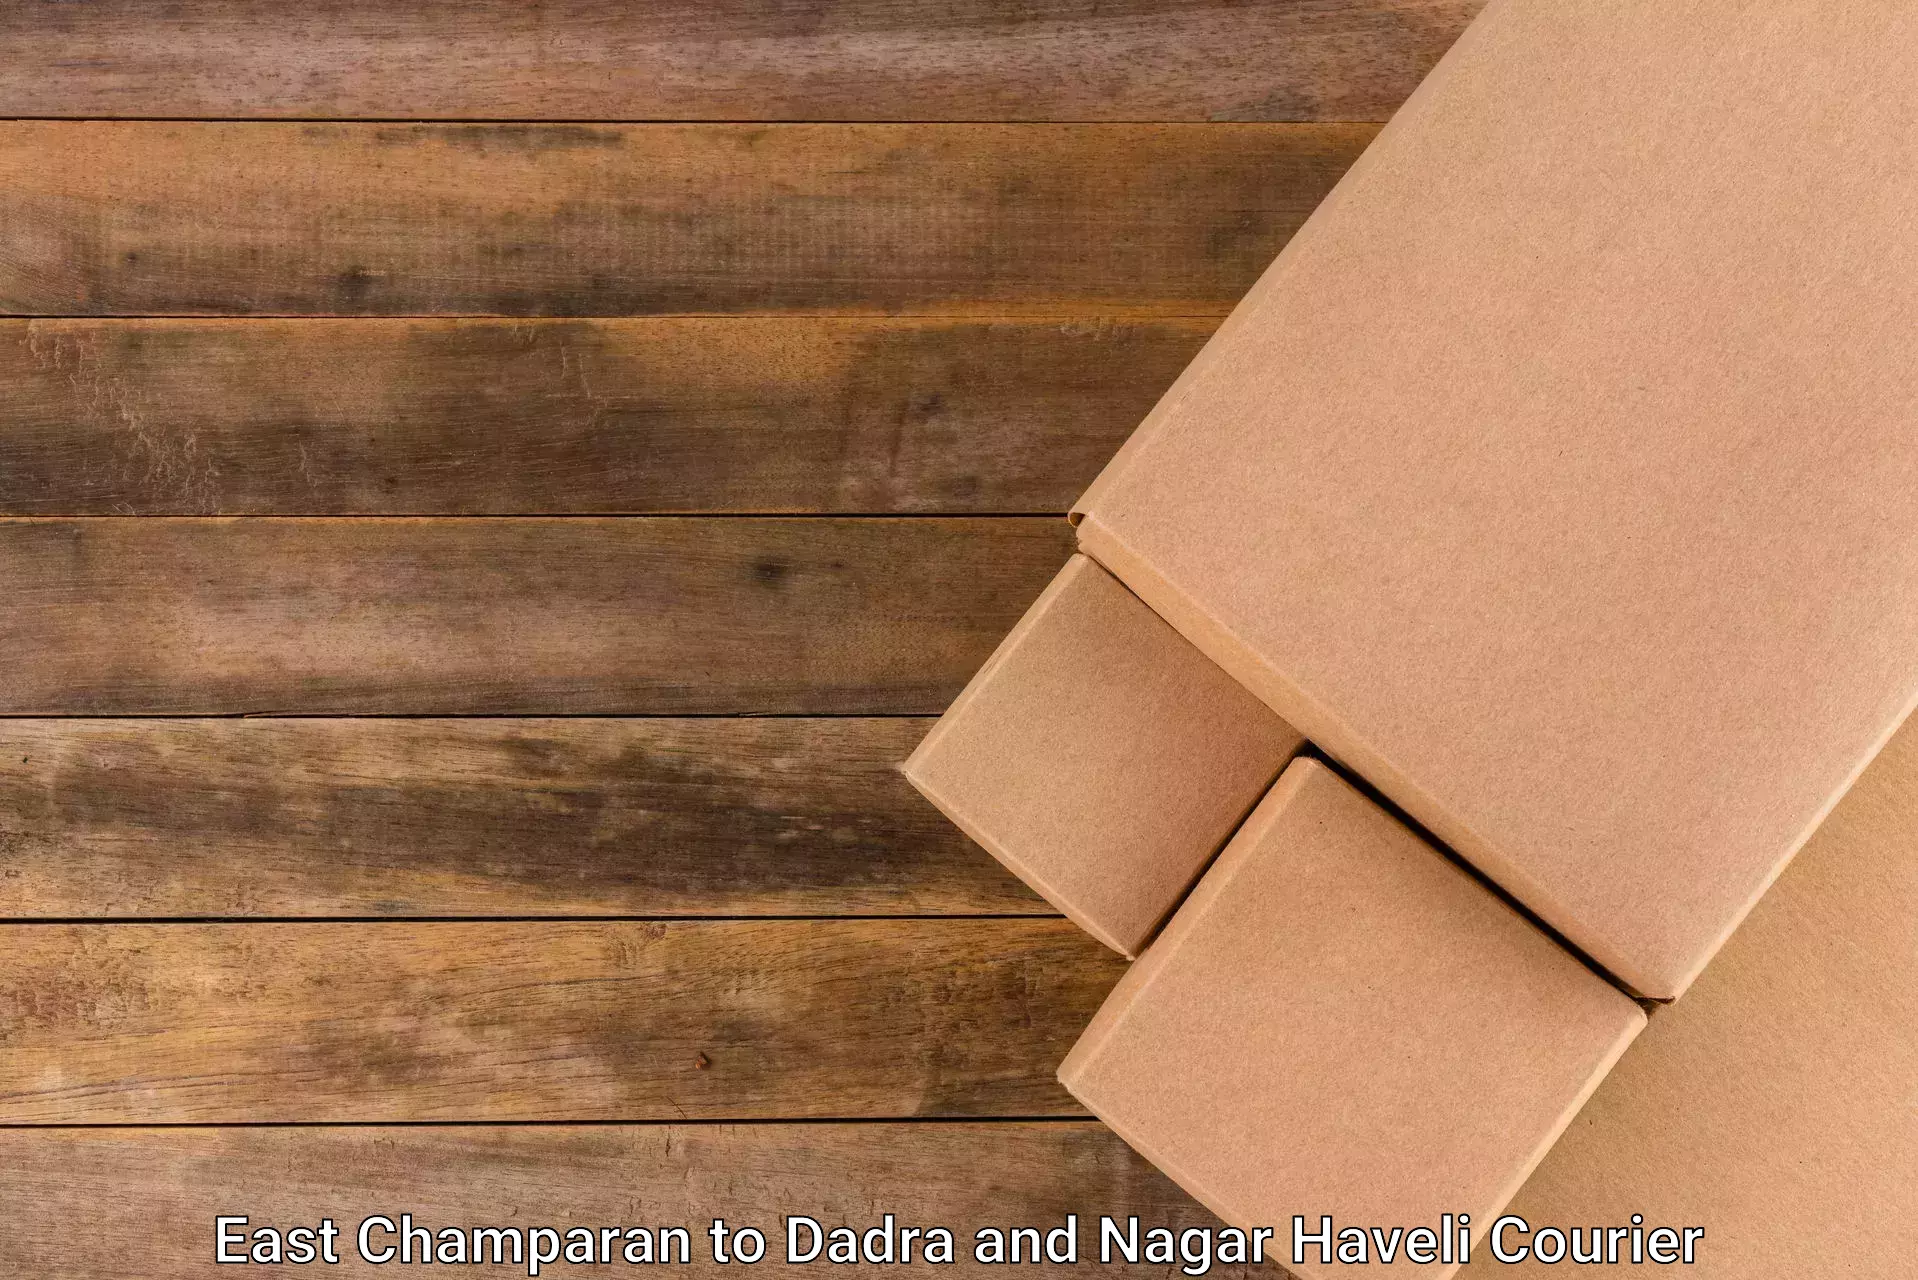 Pharmaceutical courier East Champaran to Dadra and Nagar Haveli